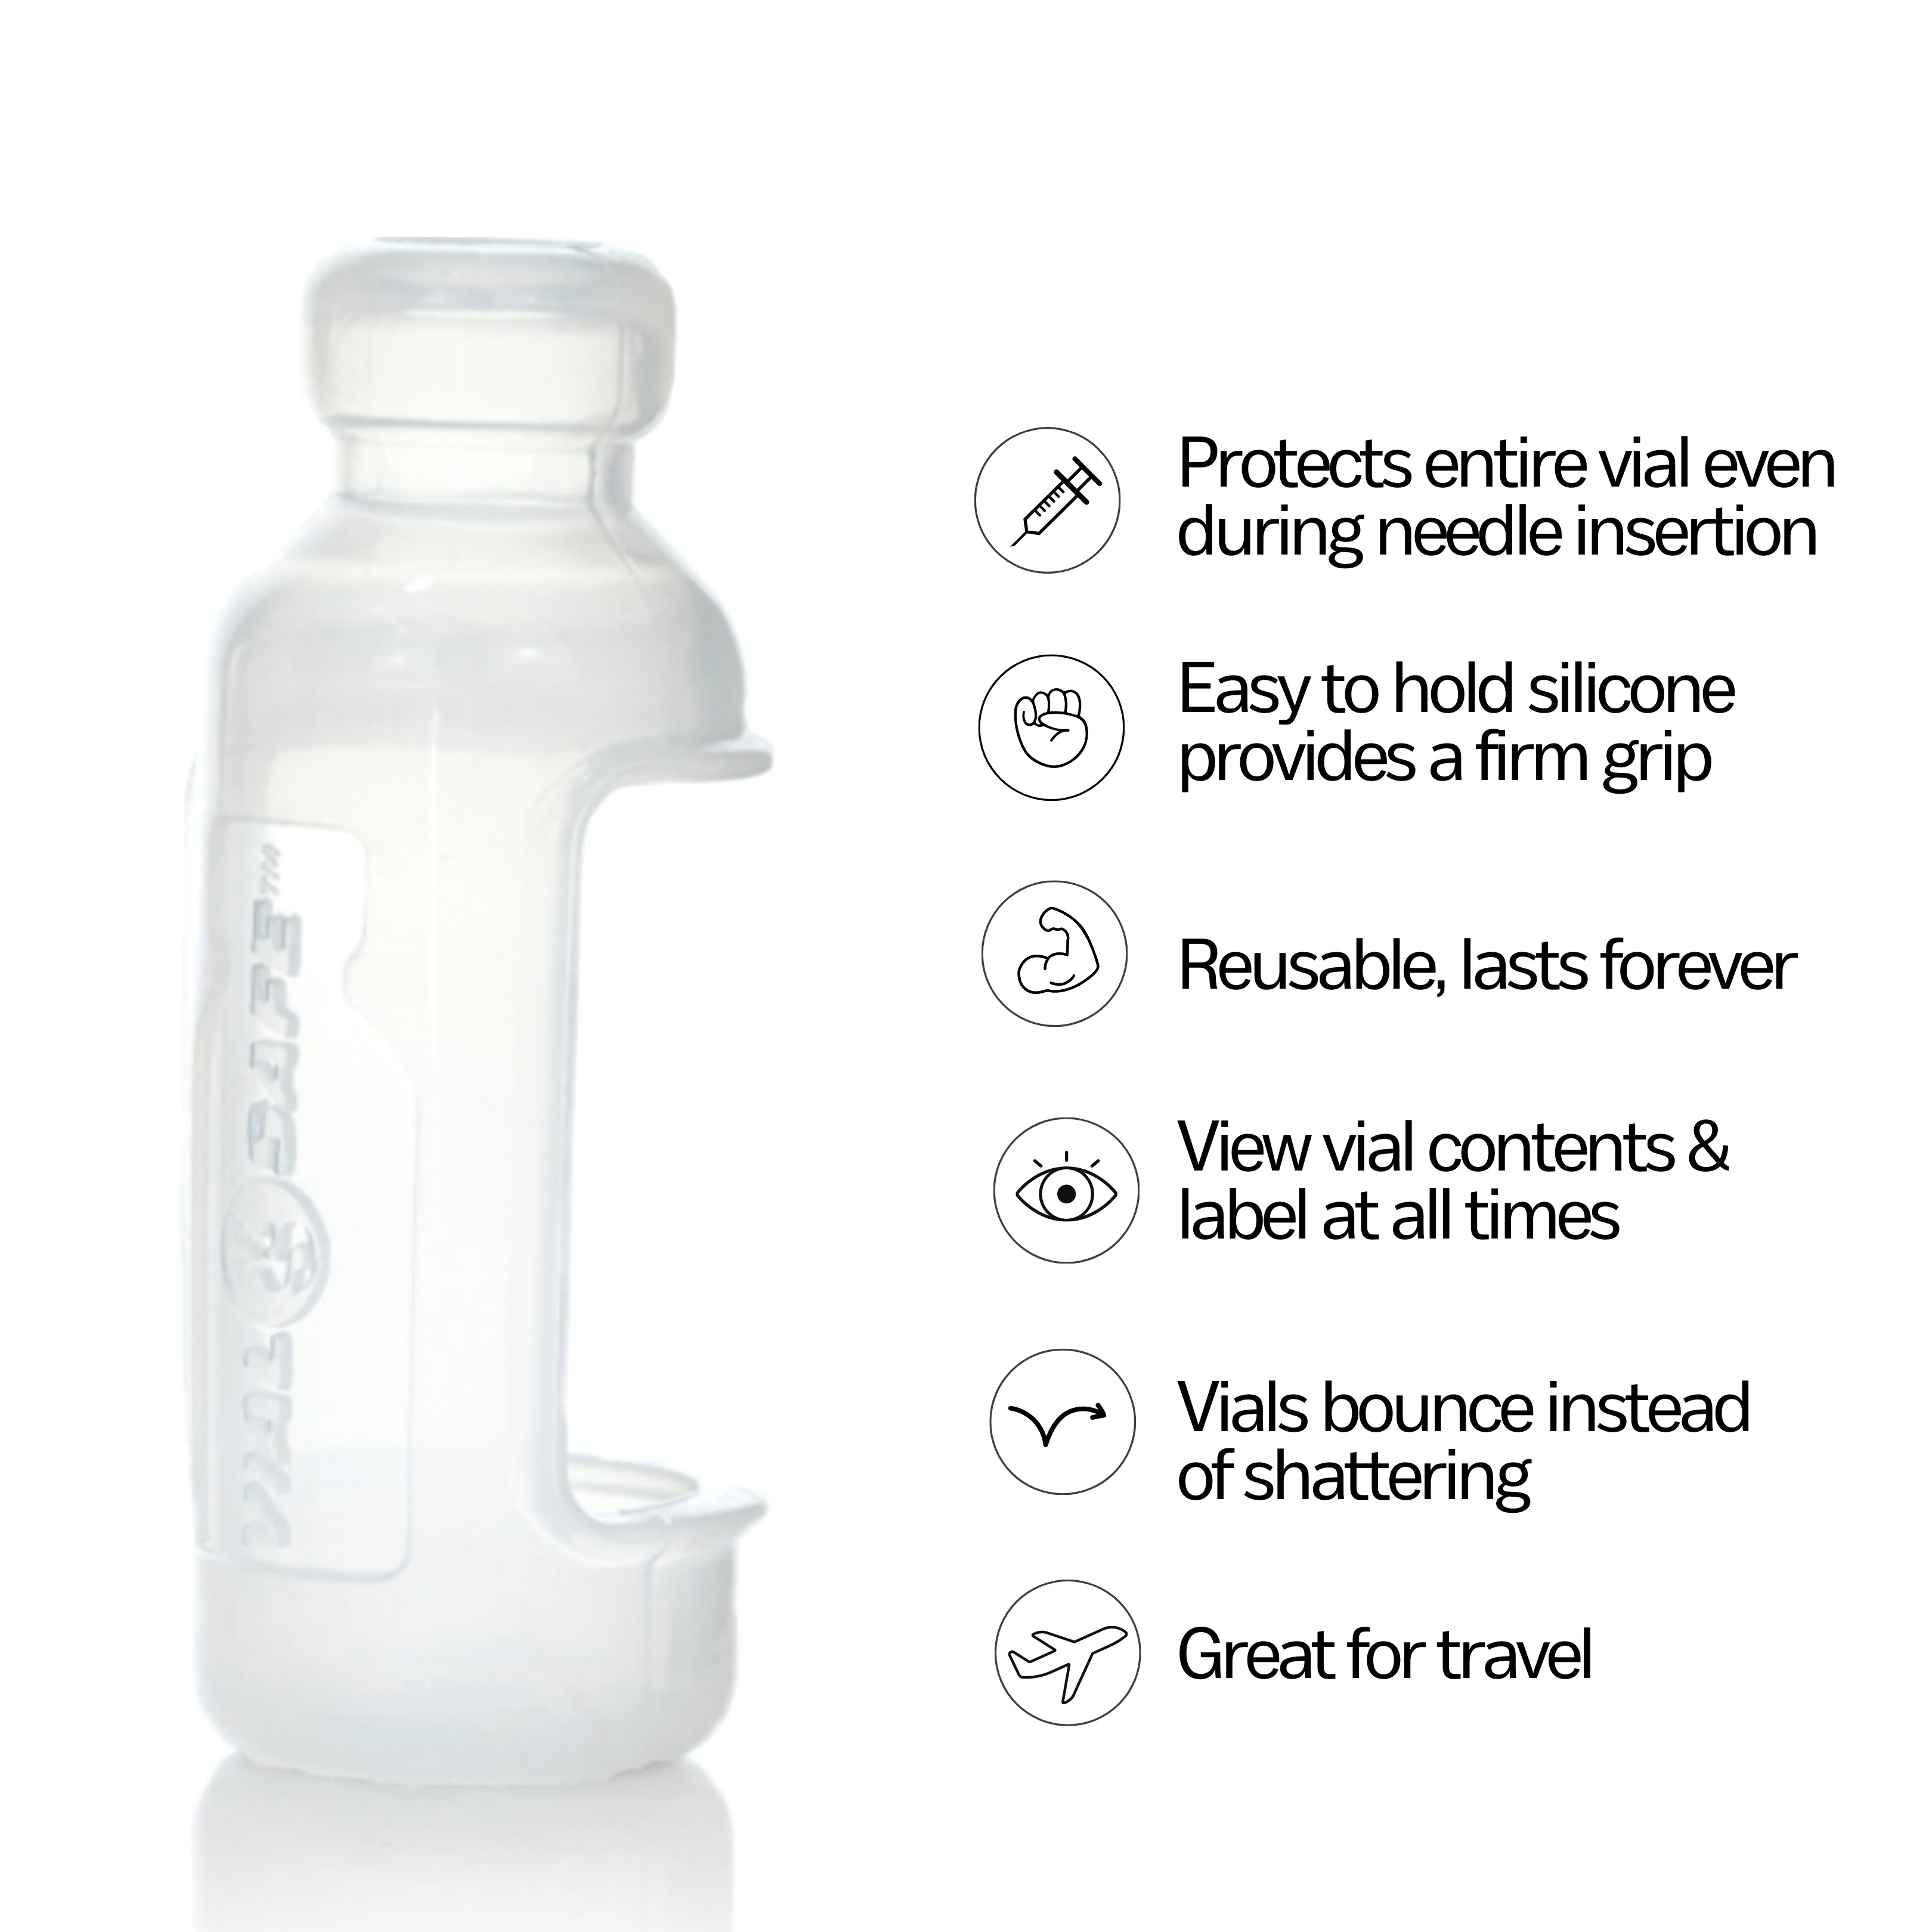 Clear 2-Pack,  Insulin Vial Protector Case (Fits Lantus, Apidra or Admelog)